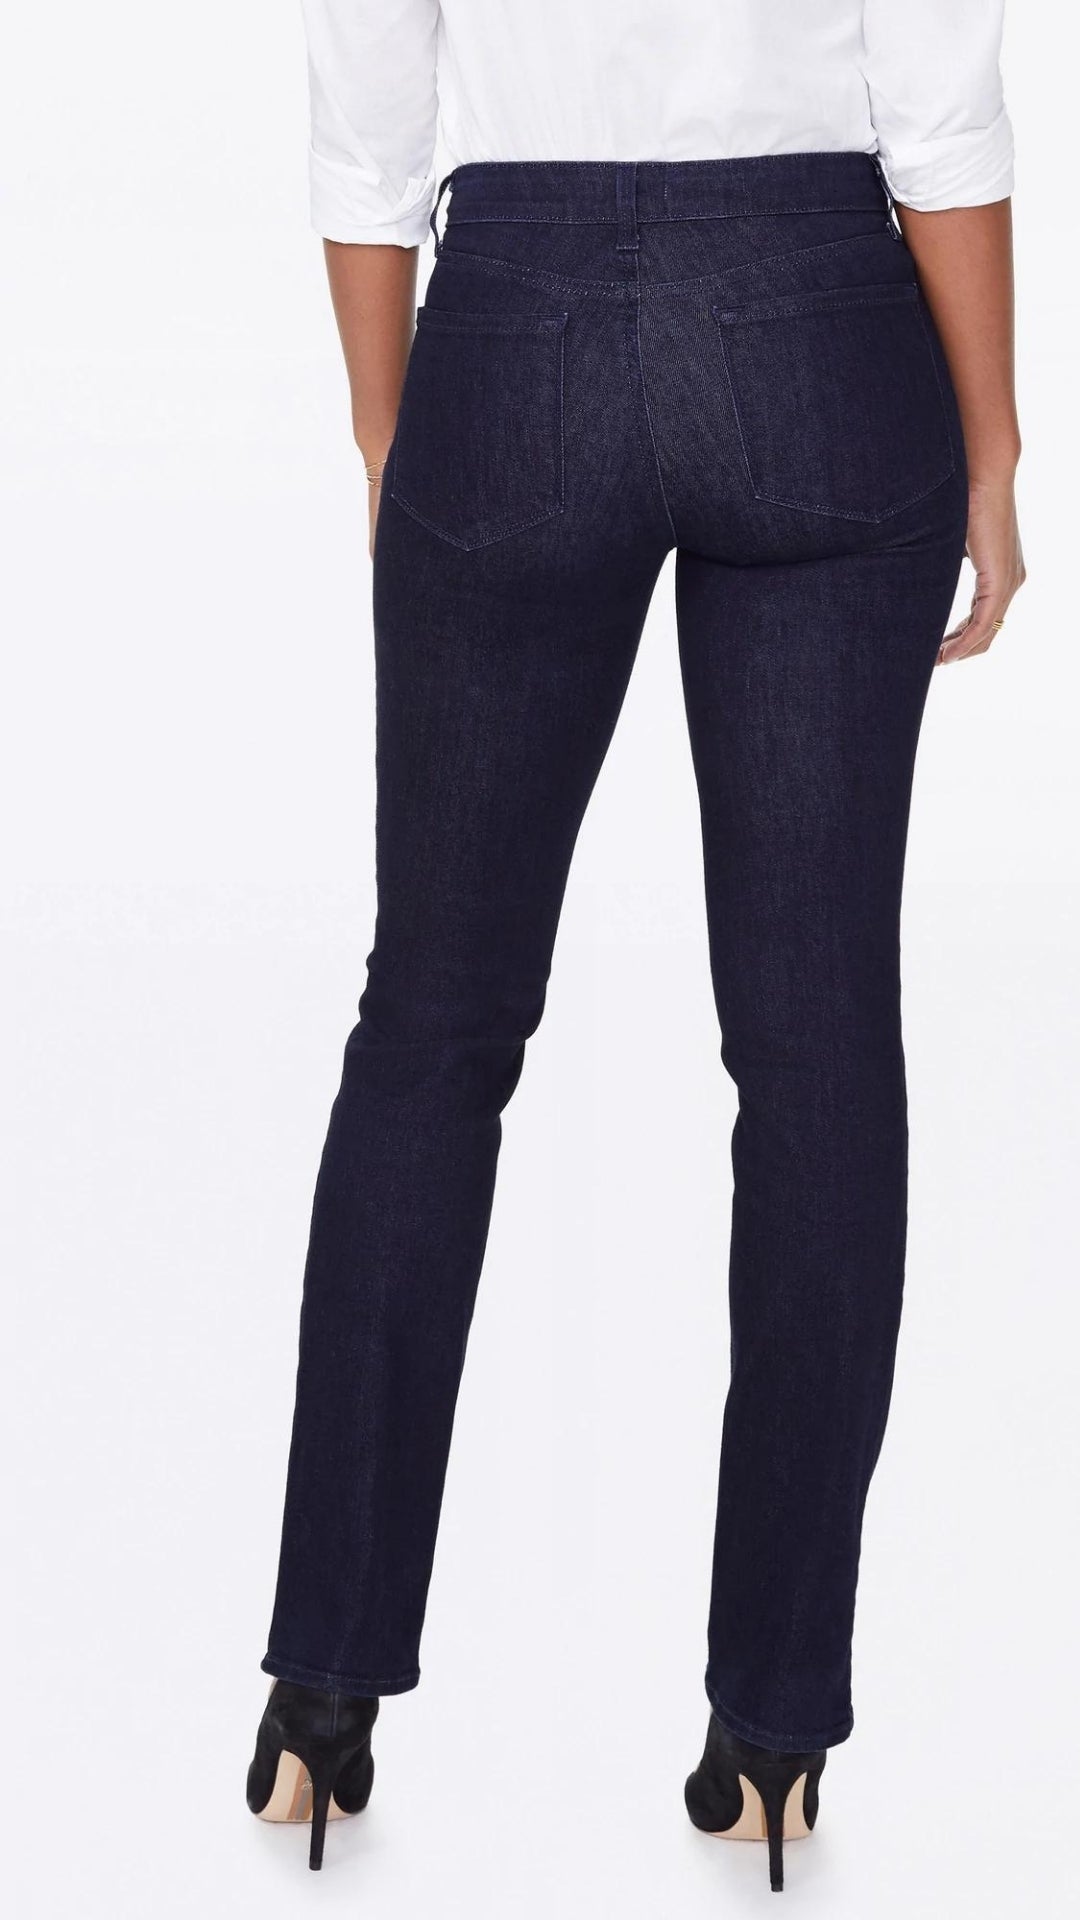 Marilyn Straight Jeans - Rinse